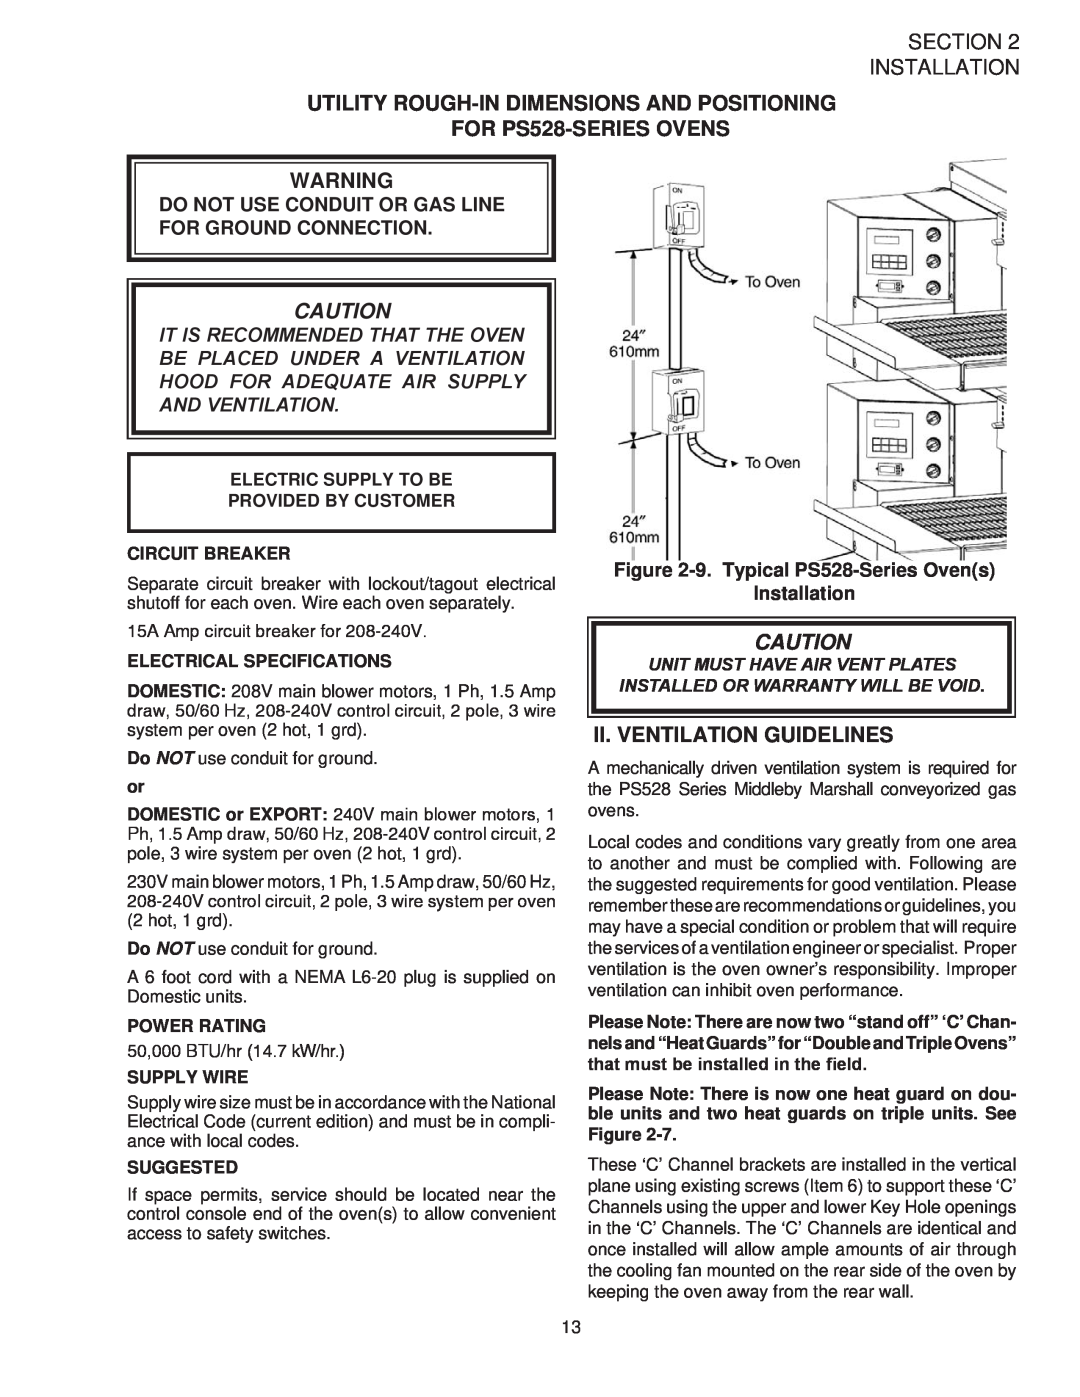 Middleby Marshall PS528G UTILITY ROUGH-IN DIMENSIONS AND POSITIONING FOR PS528-SERIES OVENS, Ii. Ventilation Guidelines 